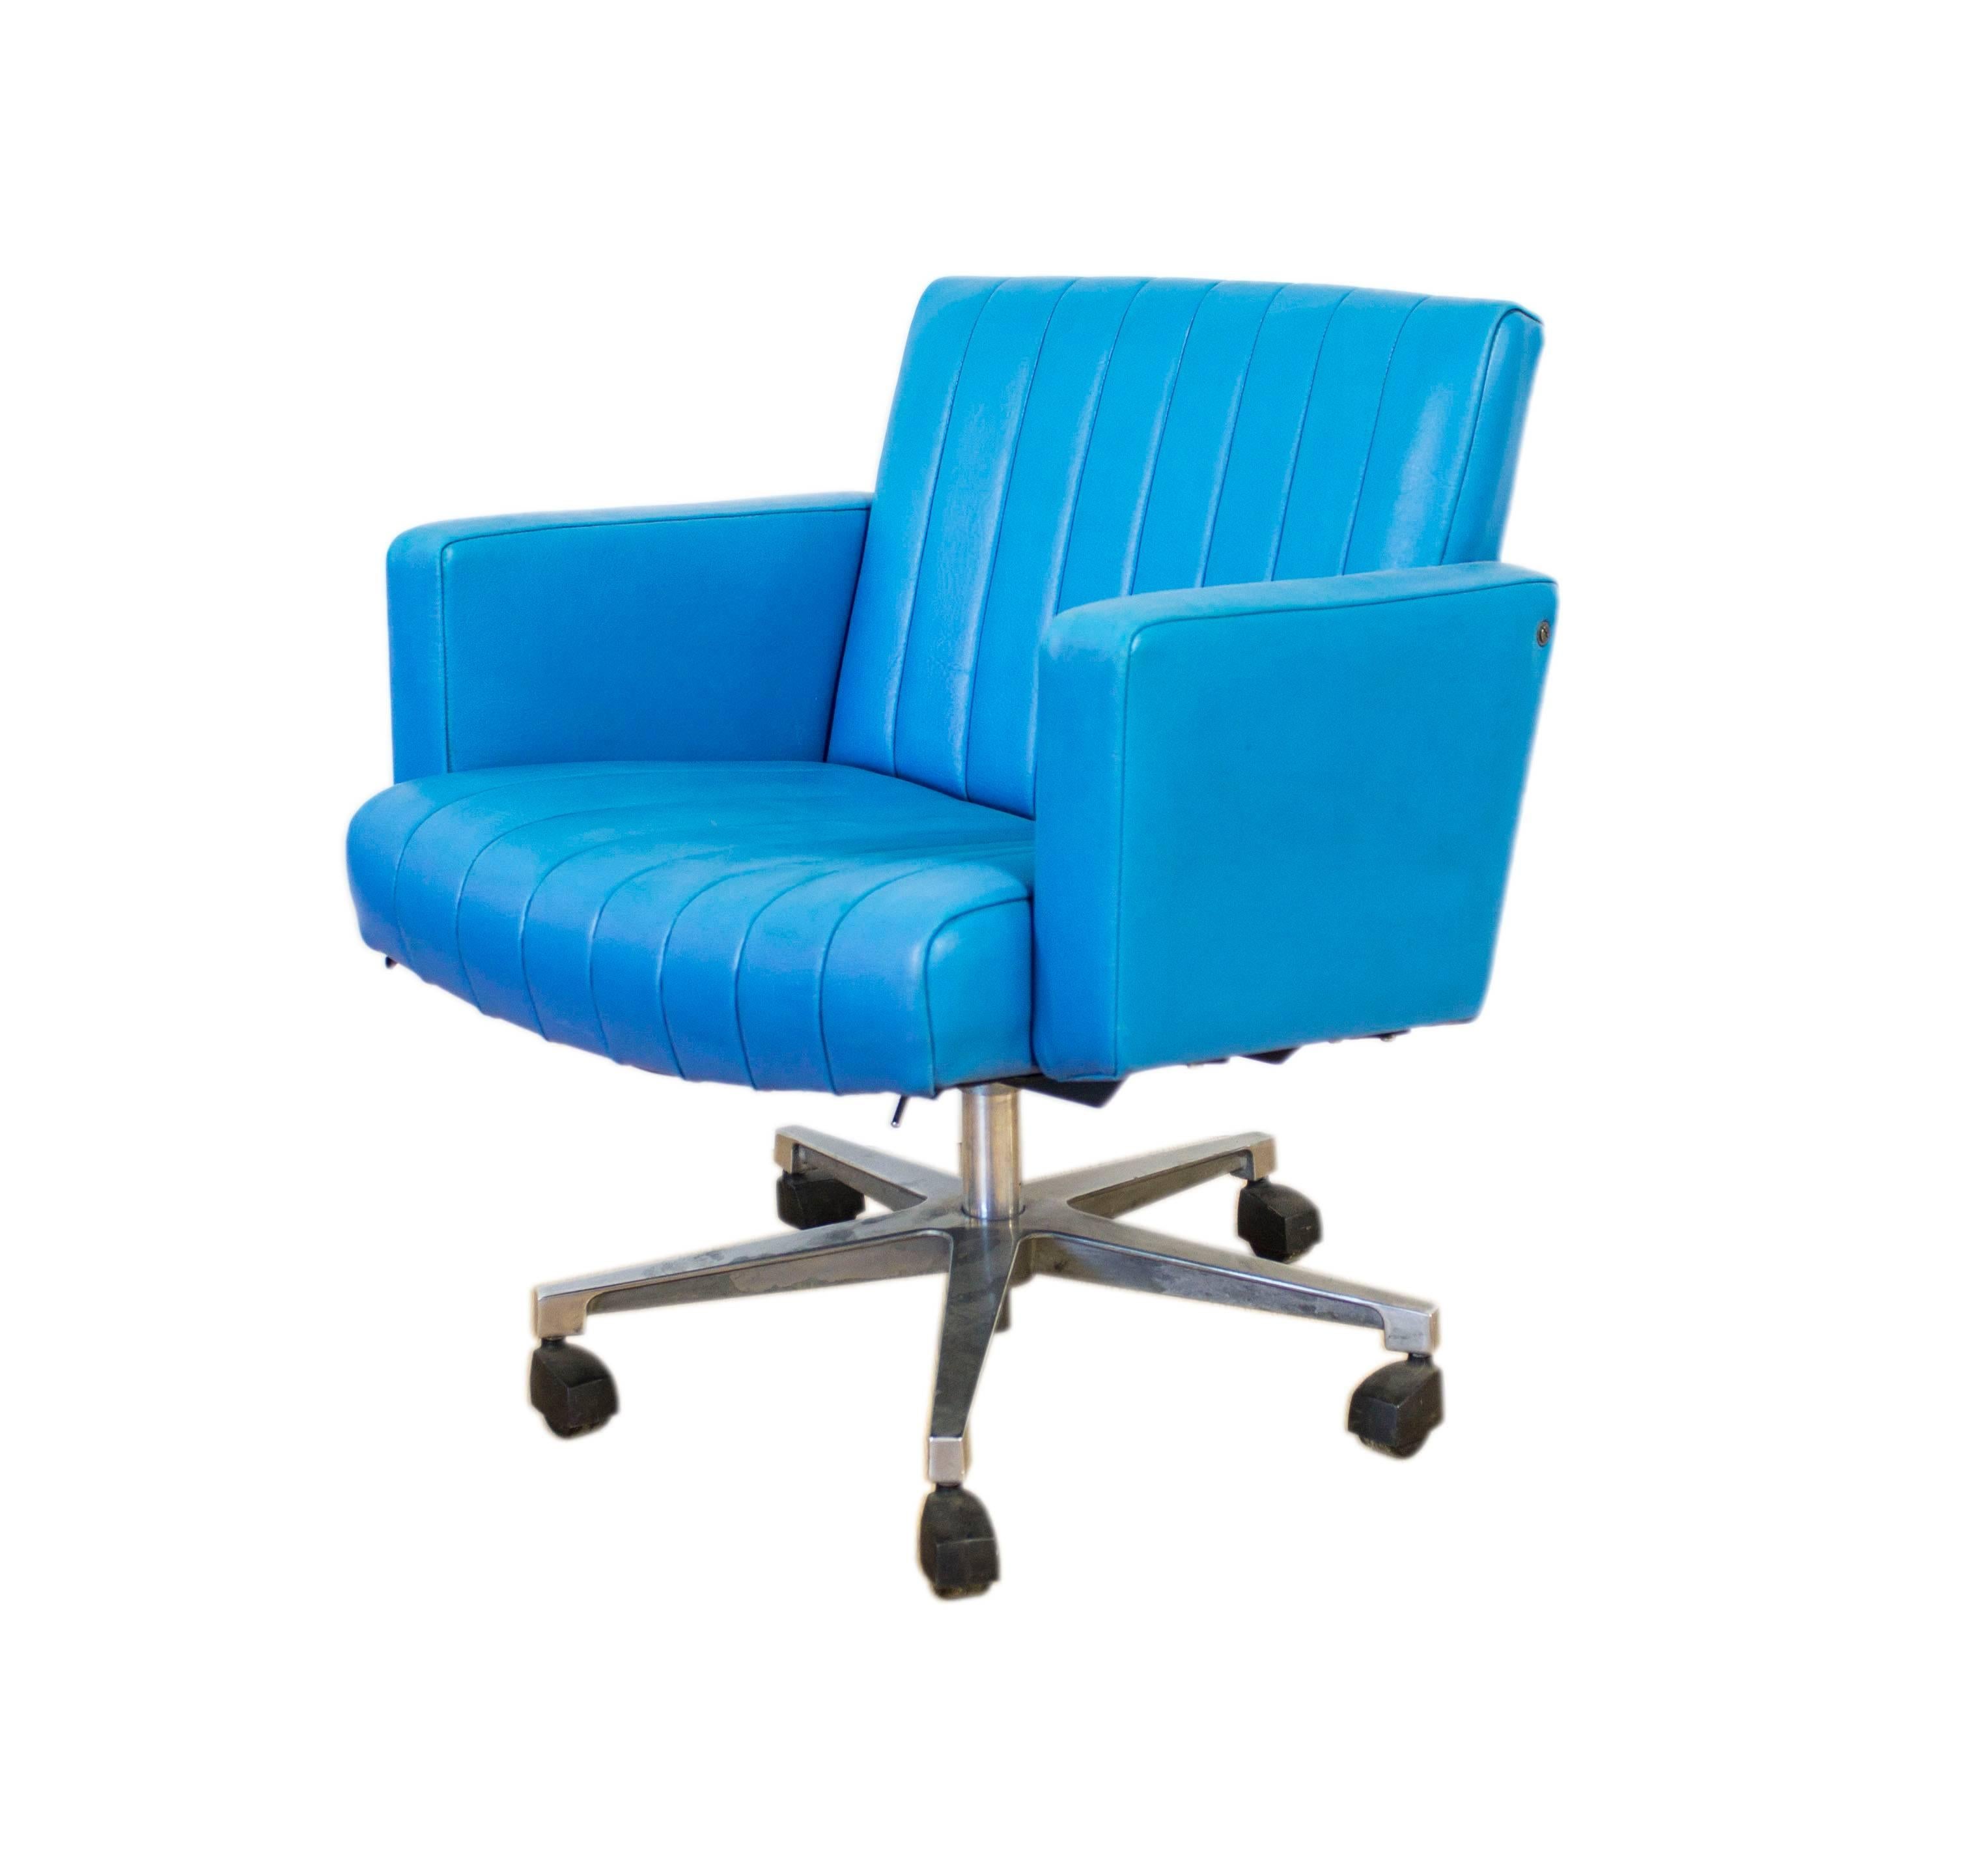 If there is one thing the 1960s are synonymous for it’s style and colour, with designers experimenting with ever bolder colors and patterns to create stunning and unique pieces of furniture.

Highly practical, this stunning Turquoise armchair